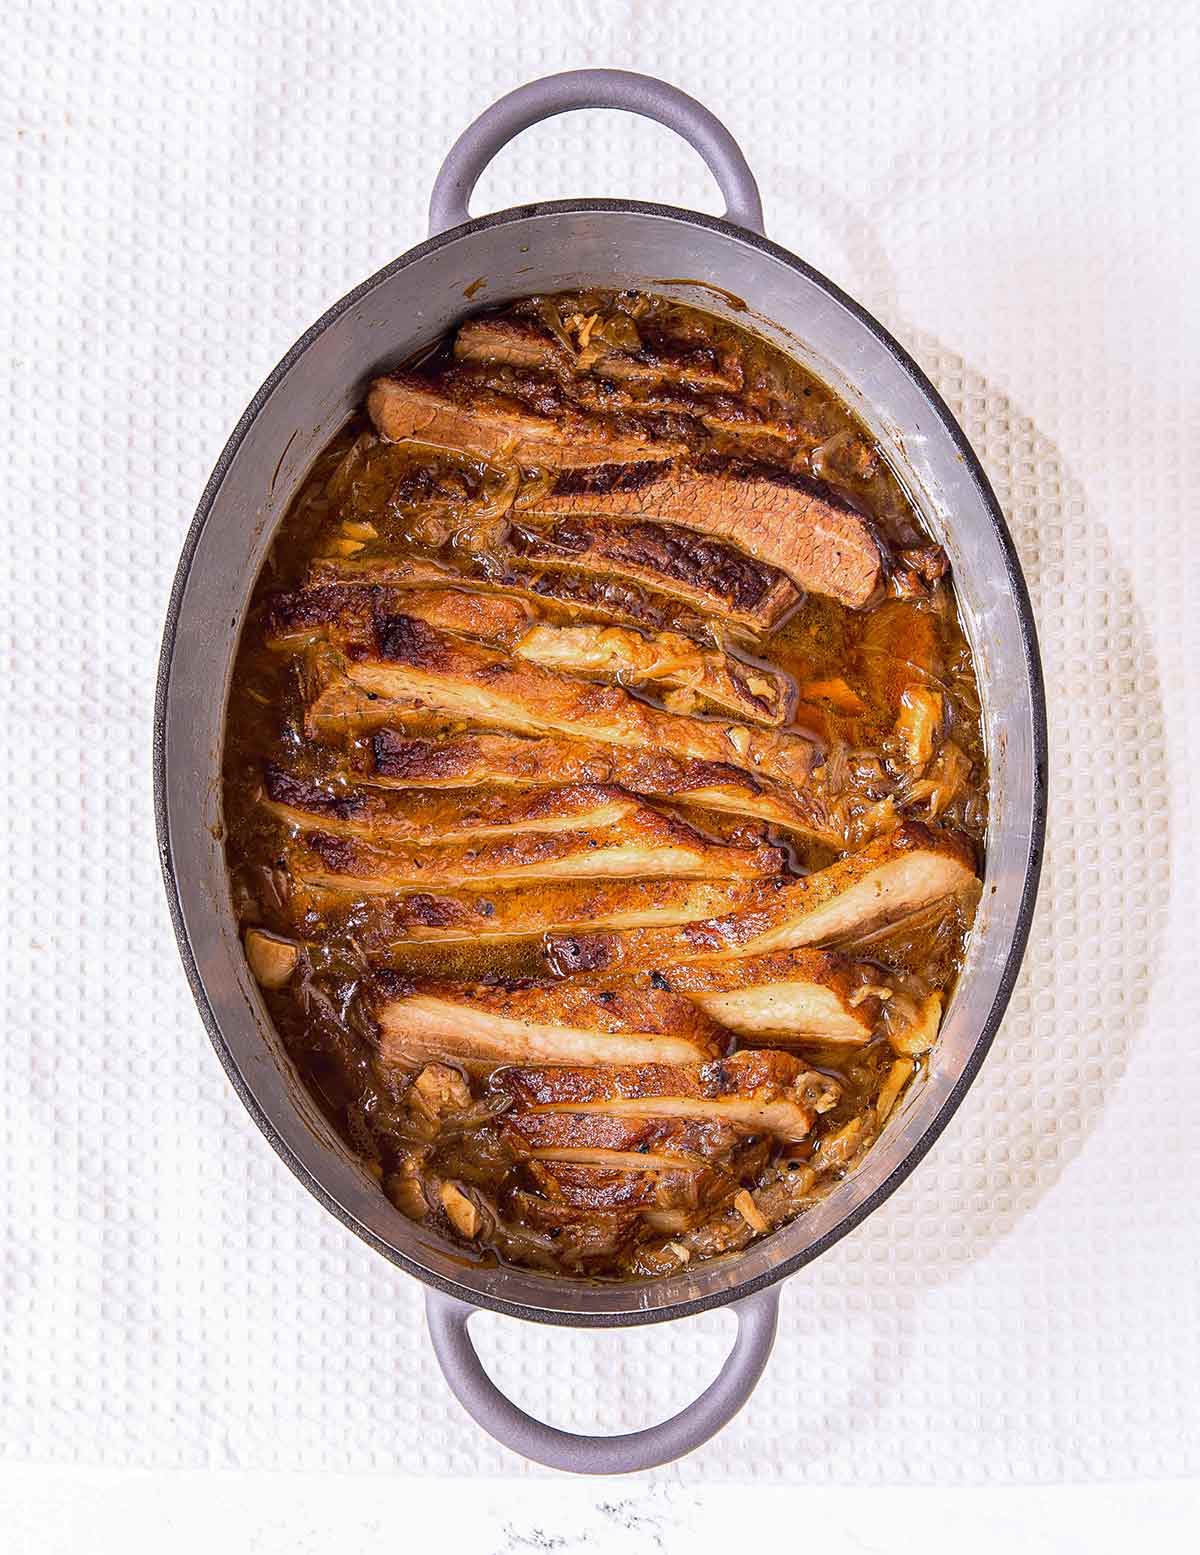 French onion brisket in an oval enamel casserole dish on a white background.